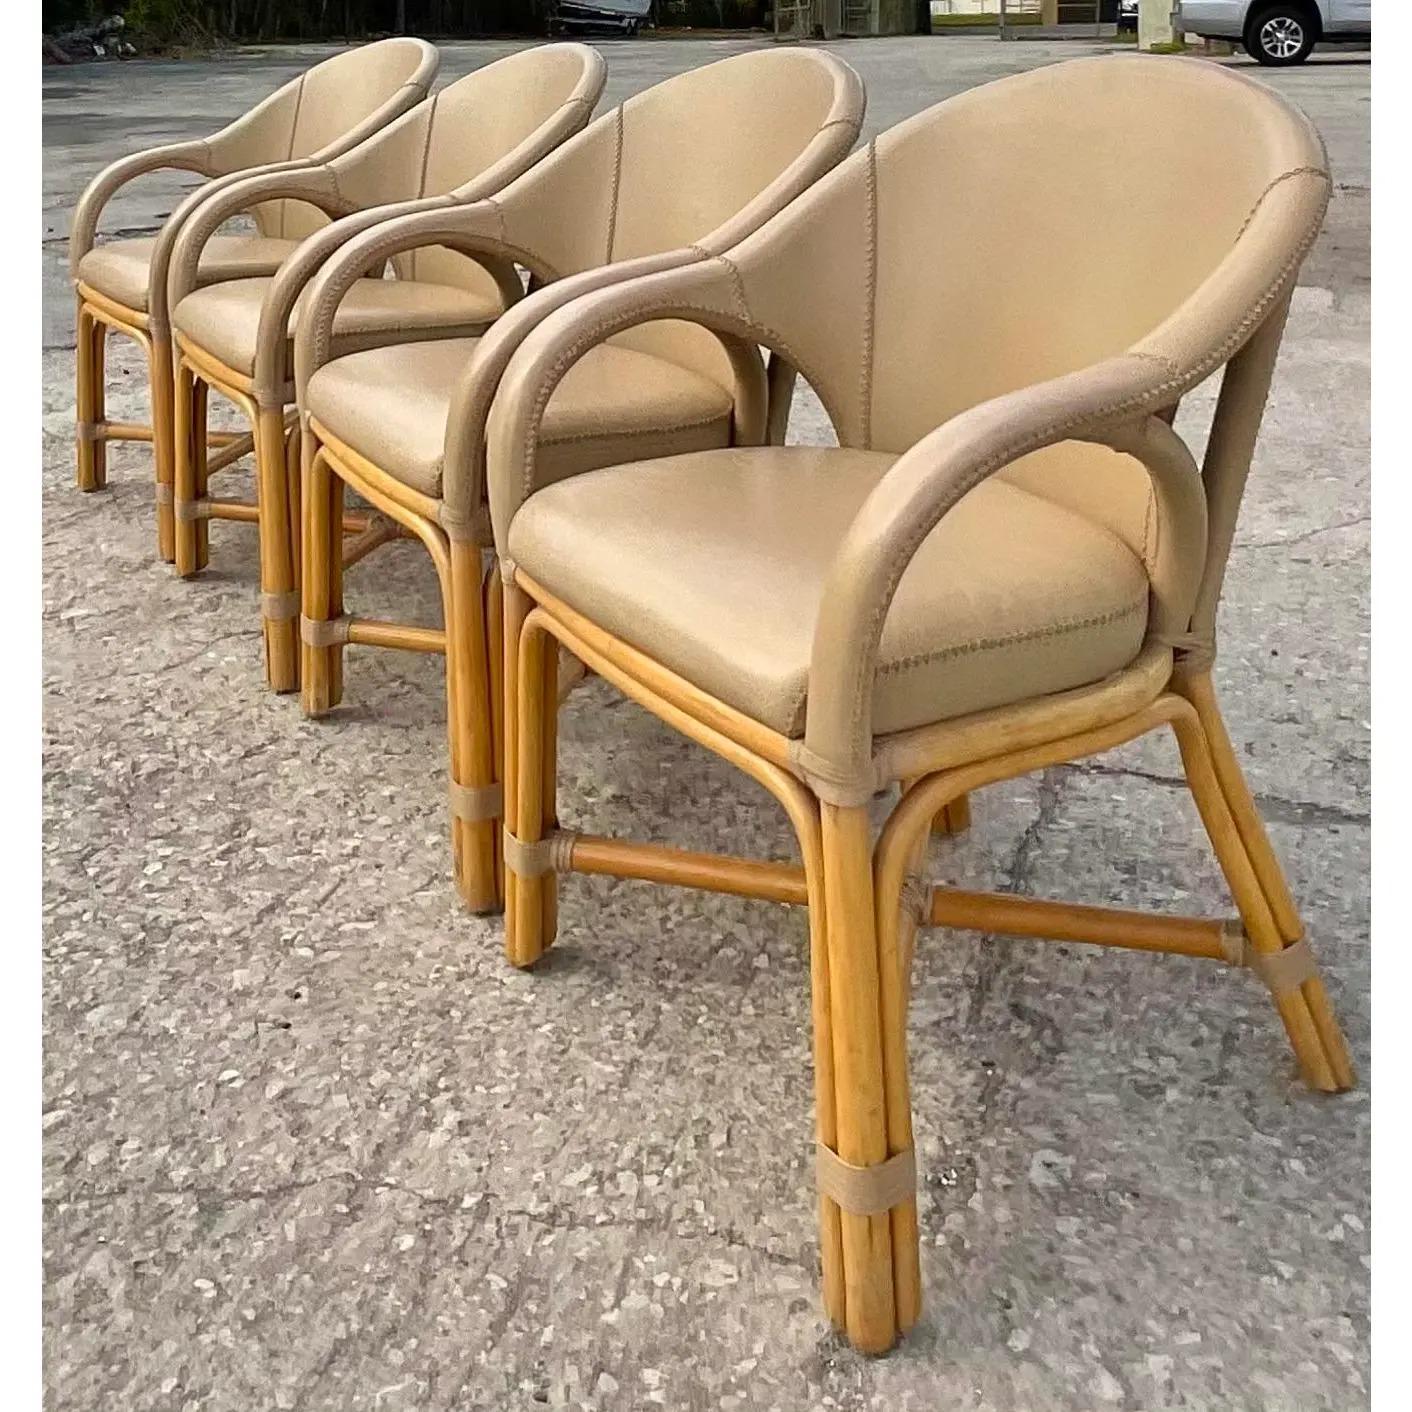 Fantastic set of 4 vintage Coastal dining chairs. Made by the iconic Antonio Budji. Gorgeous fawn color leather with whipstitch detail. Rattan frame and legs. Tagged on the bottom. The chicest dining chairs I have seen in a long time. Acquired from